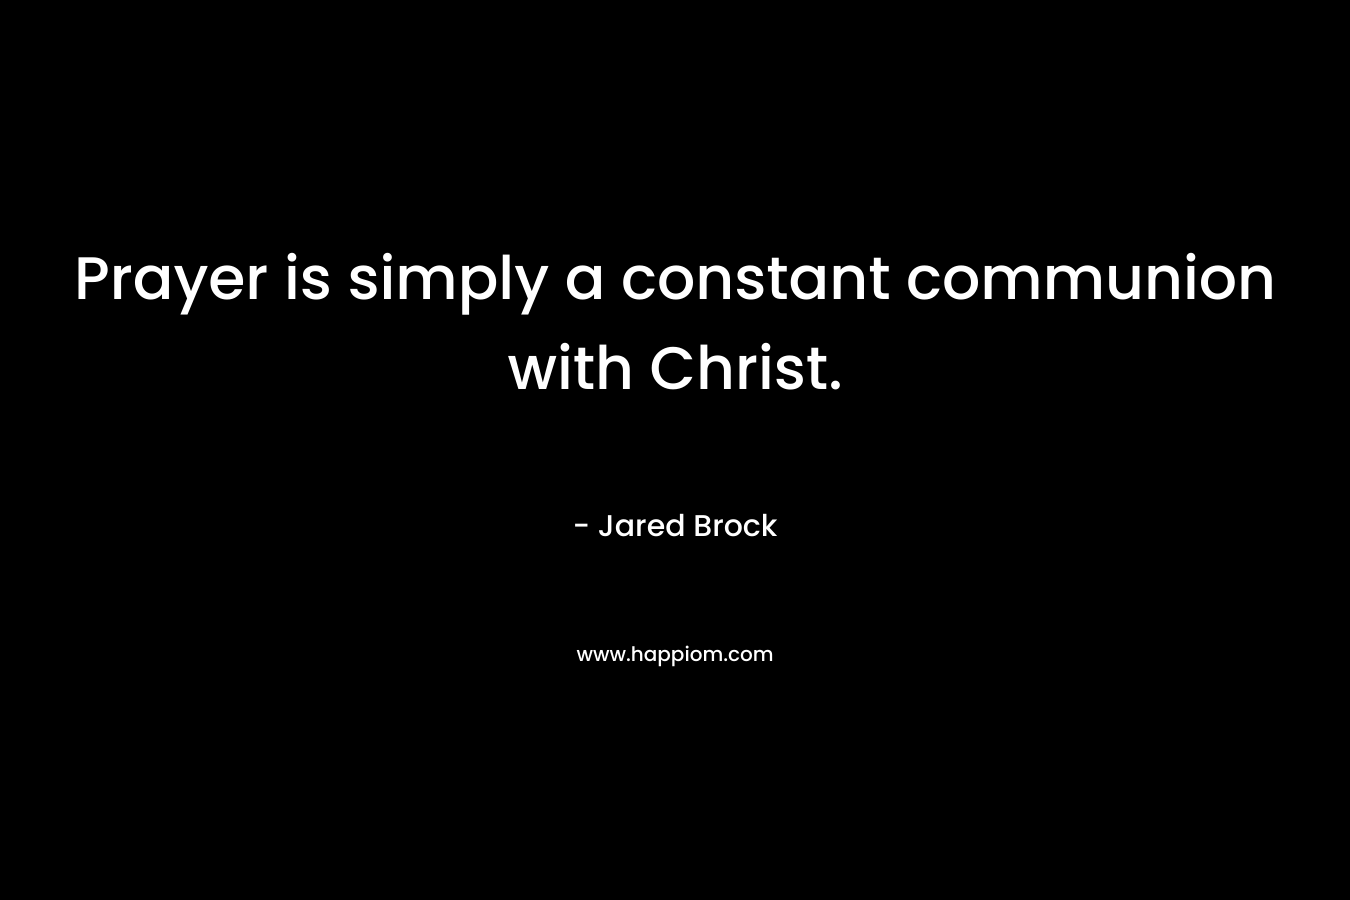 Prayer is simply a constant communion with Christ.